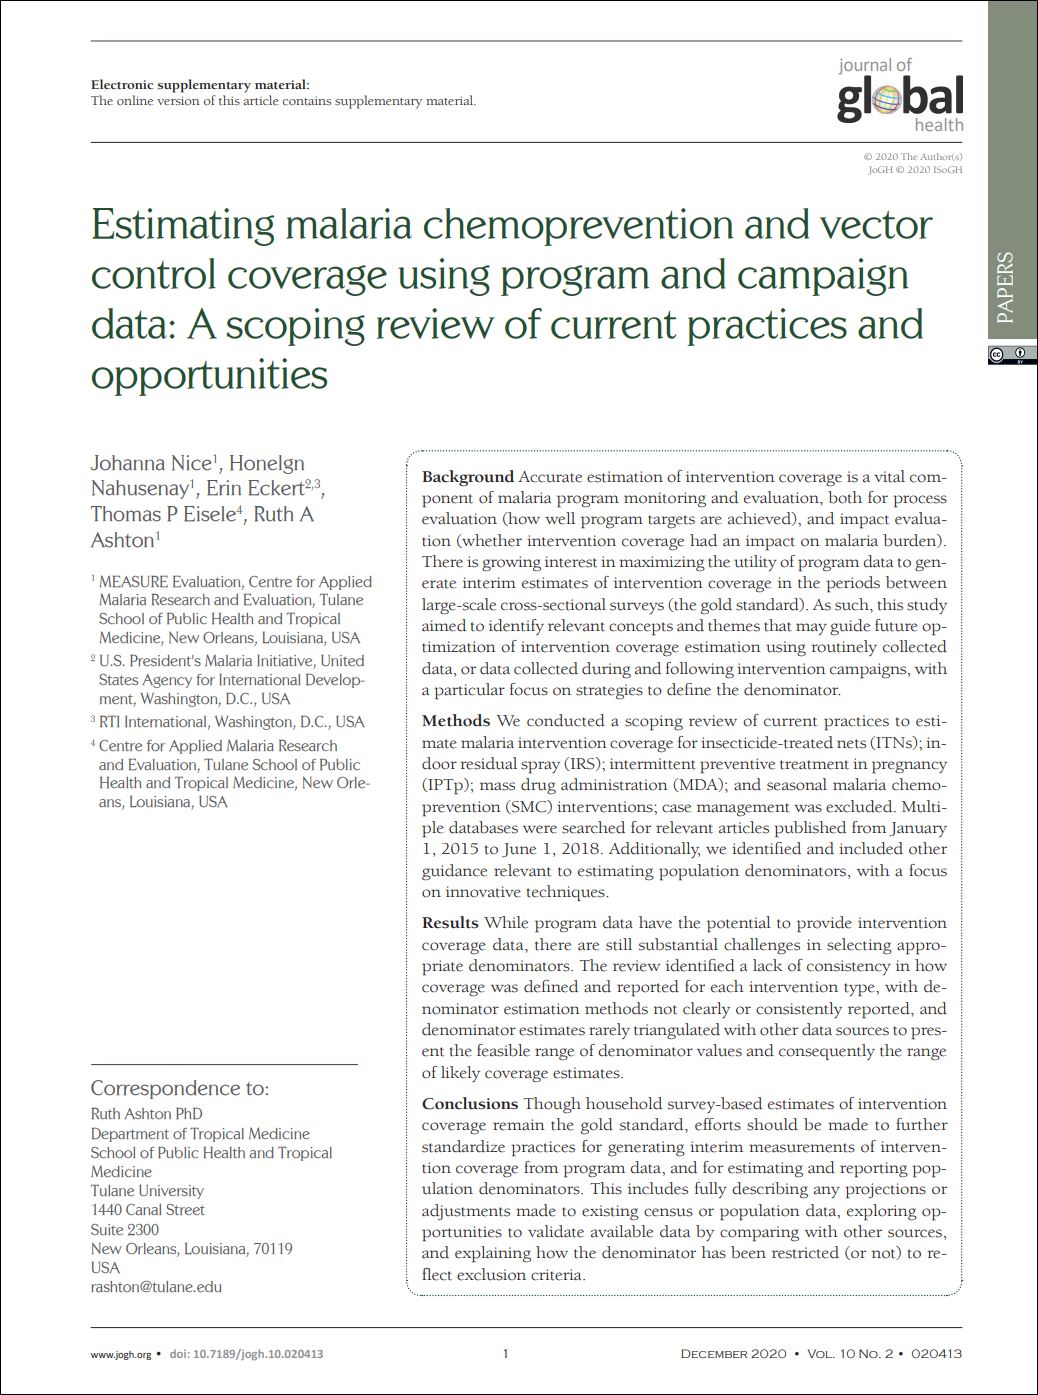 Estimating malaria chemoprevention and vector control coverage using program and campaign data: A scoping review of current practices and opportunities